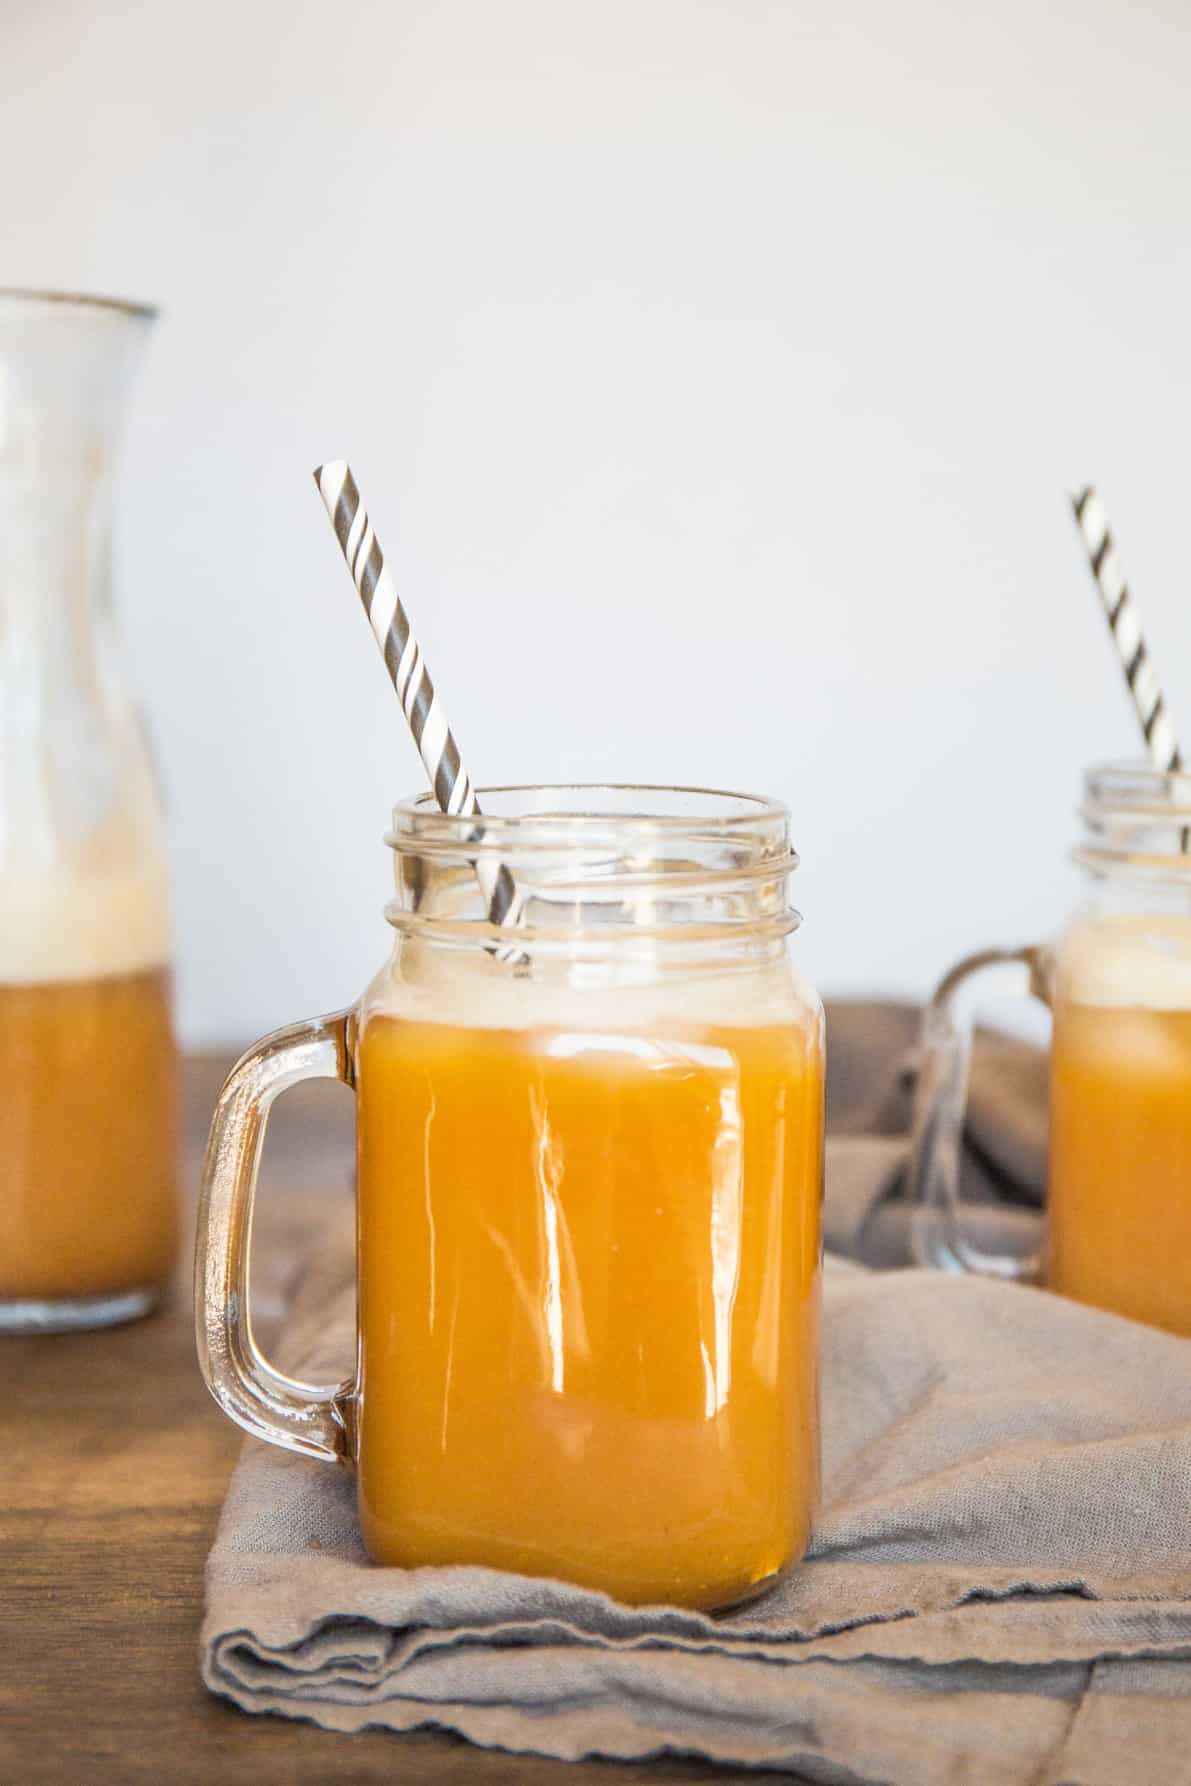 A glass of pumpkin juice with a striped straw on a wood surface.